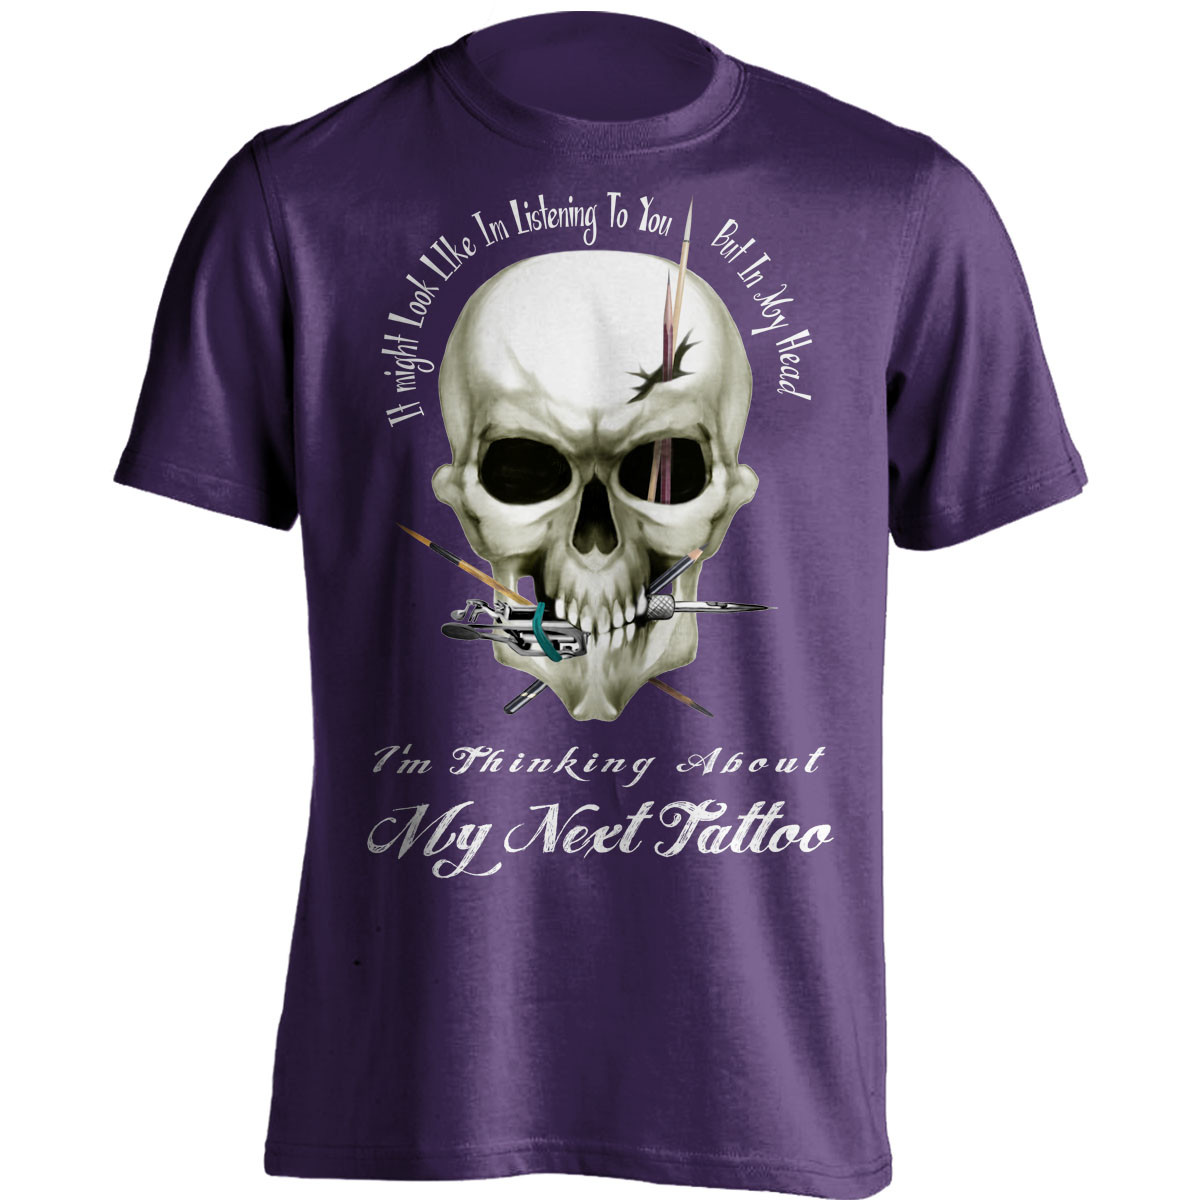 "I Might Look Like Im Listening To You" Tattoo Lovers T-Shirt